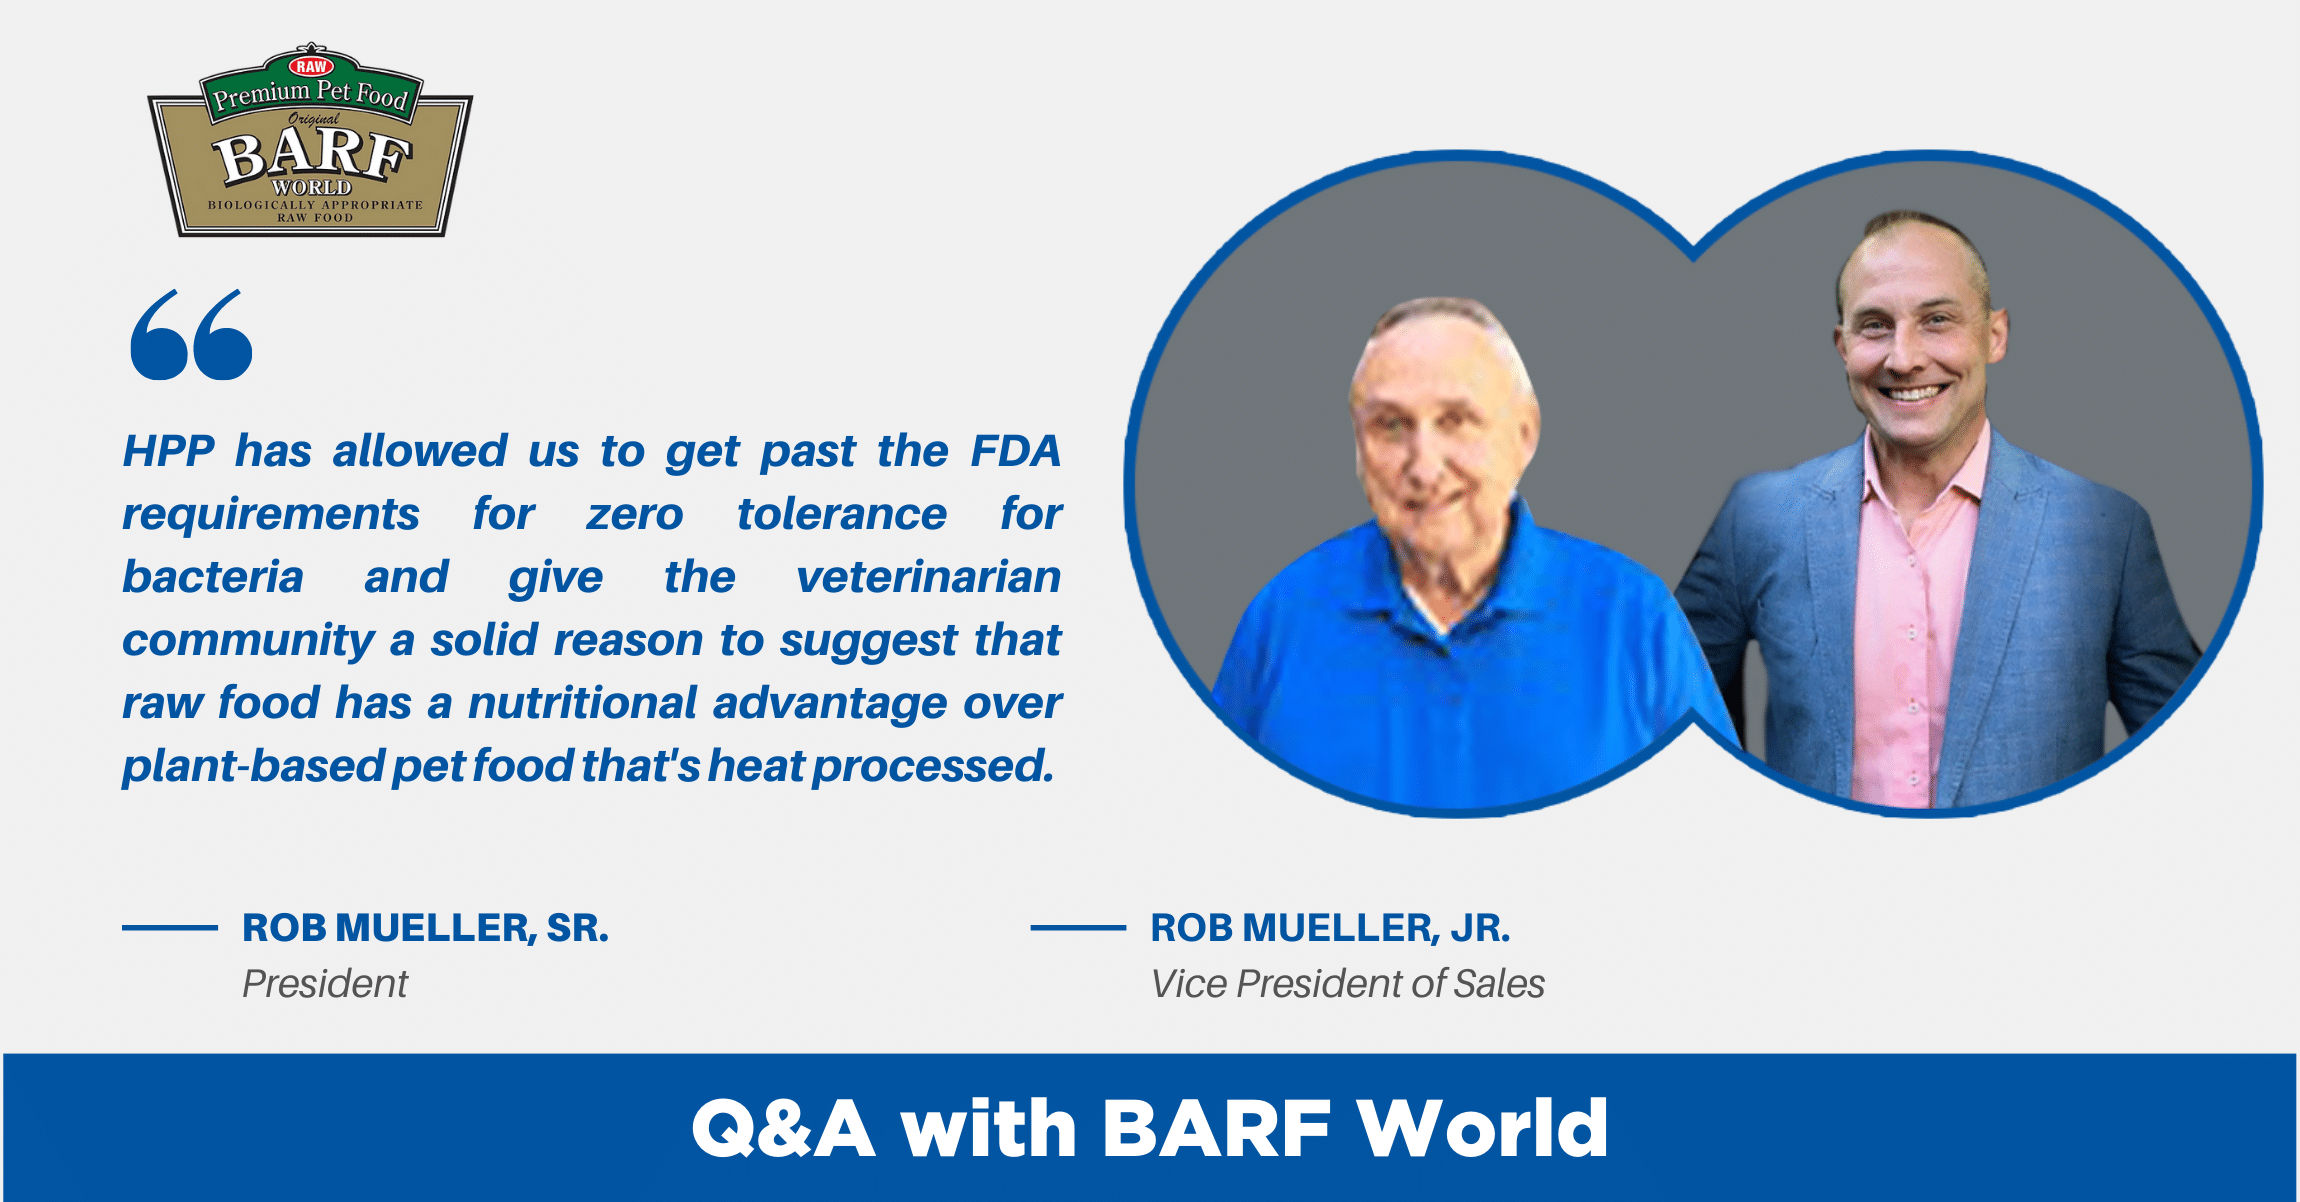 Q&A with BARF World